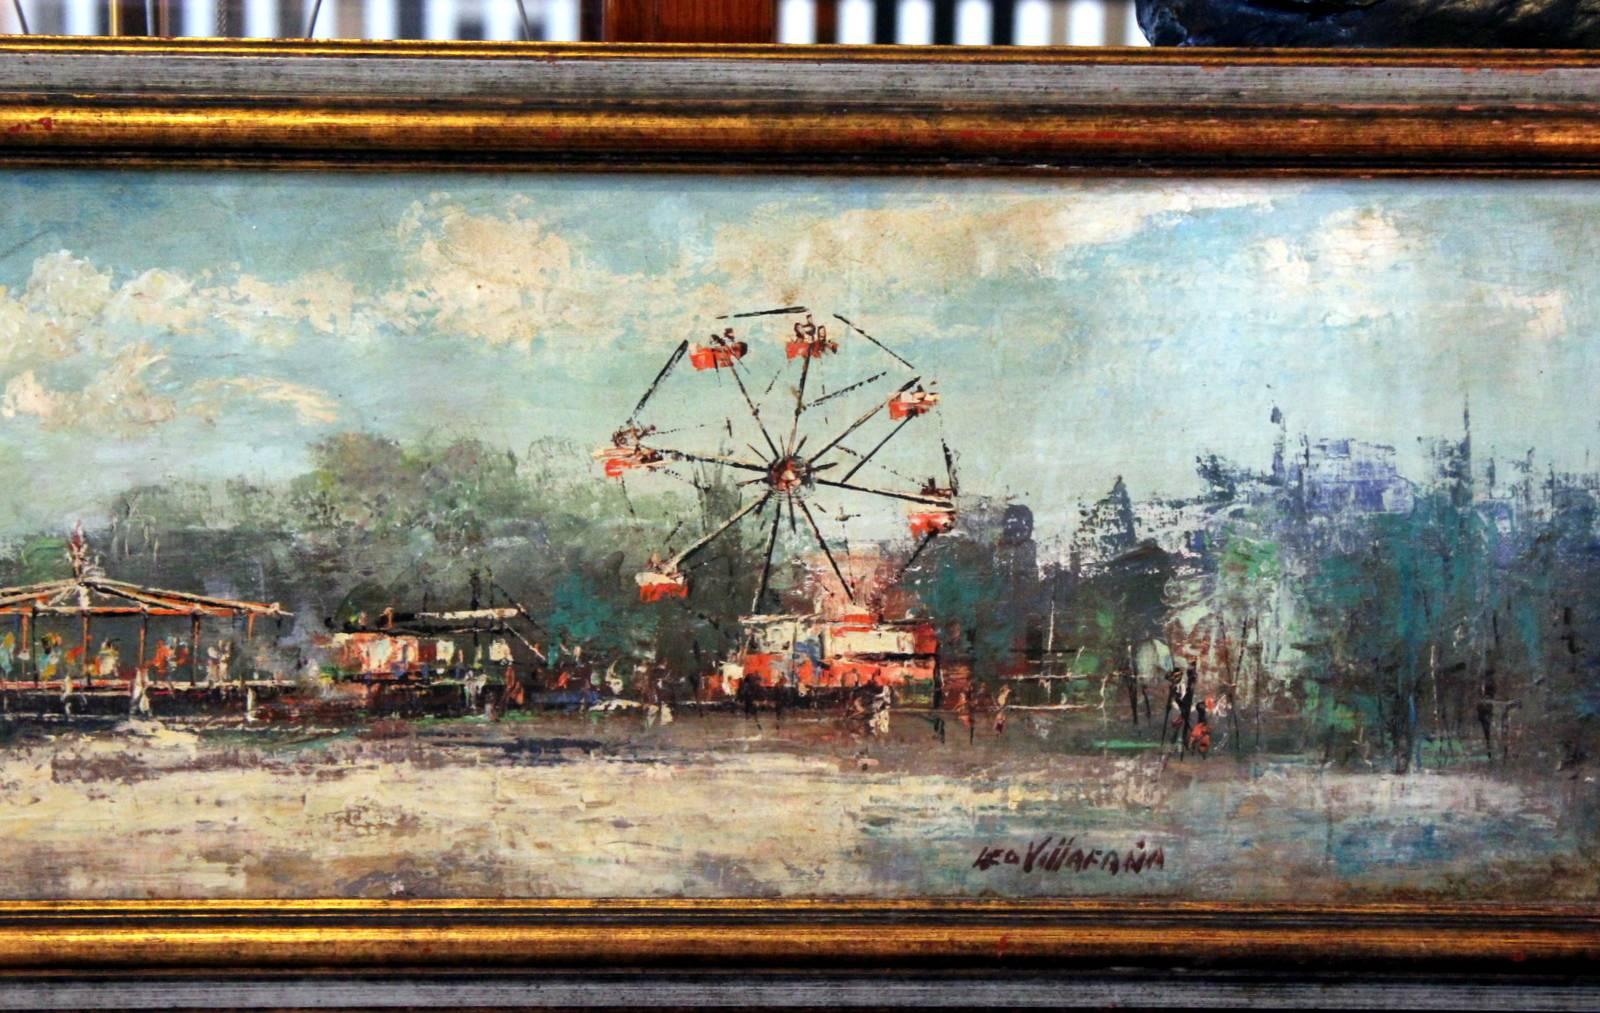 American Oil Painting of a Carnival Roller Coaster and Ferris Wheel Amusement Park